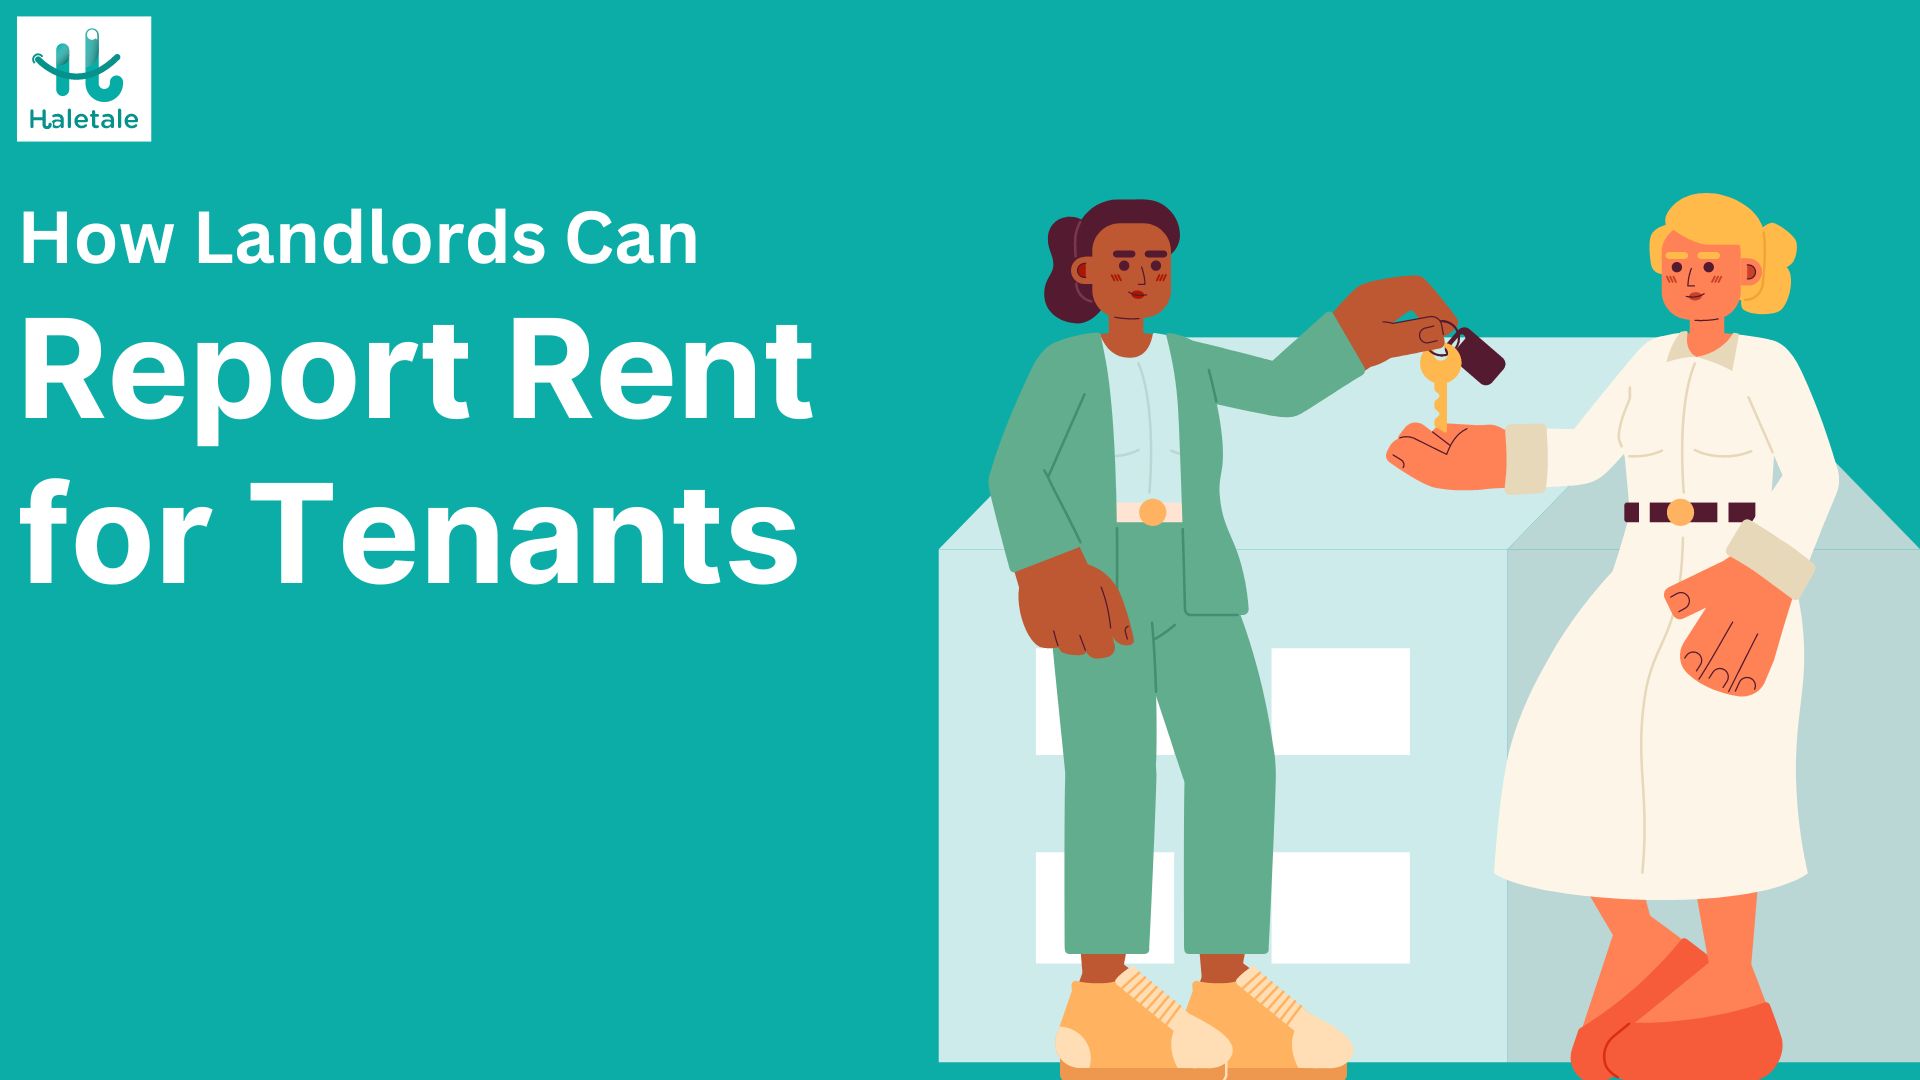 How Landlords Can Report Rent for Tenants